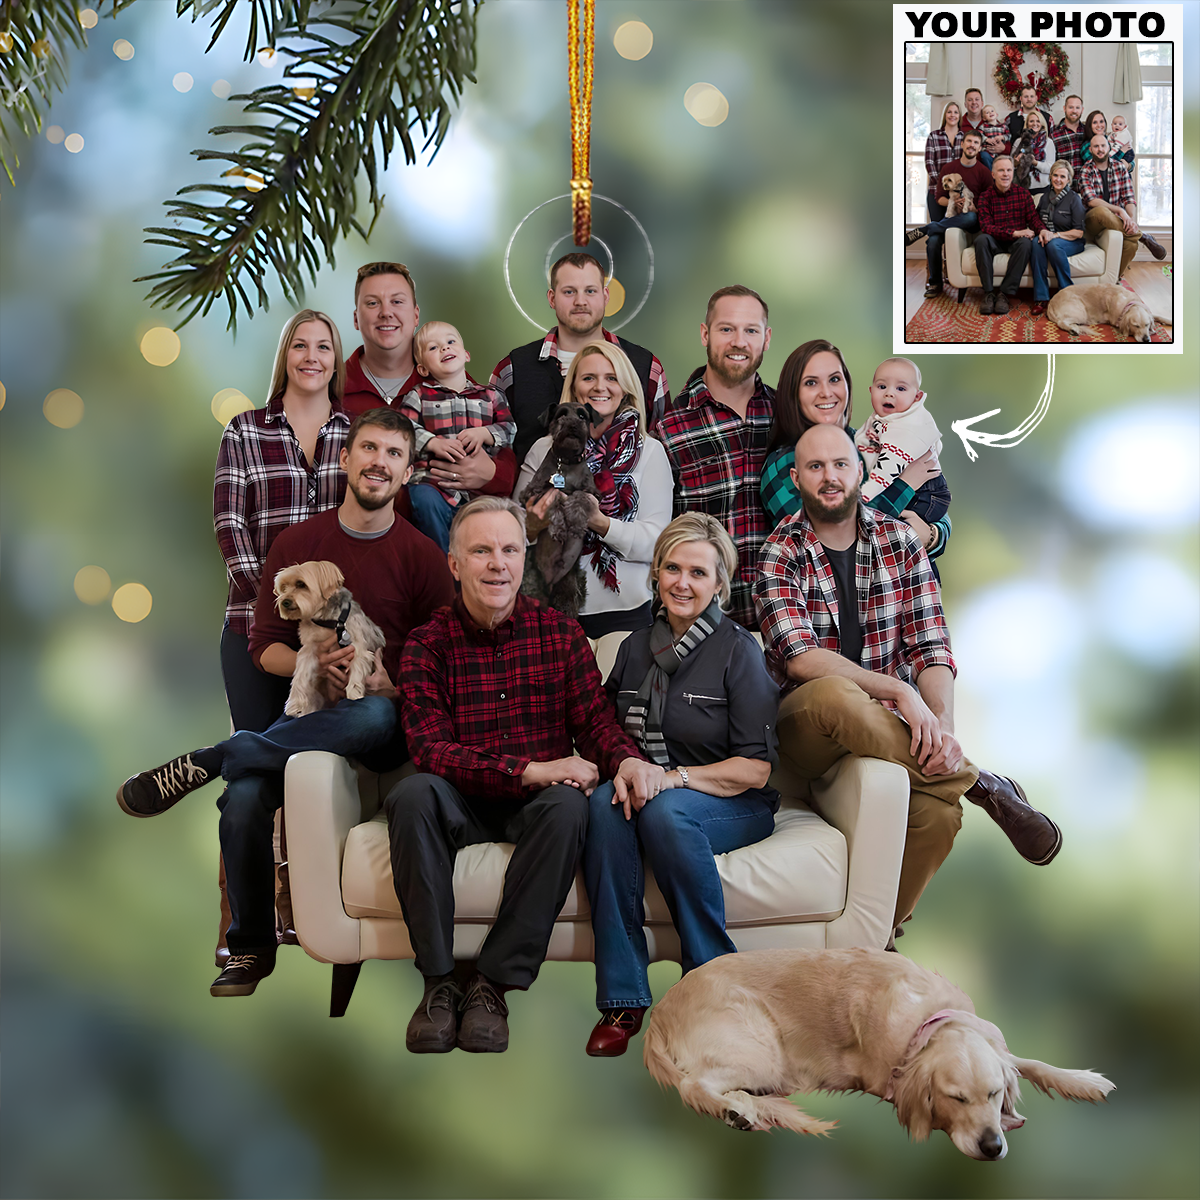 Customized Photo Ornament Family Special Moments V10 - Personalized Photo Mica Ornament - Christmas Gift For Family Members